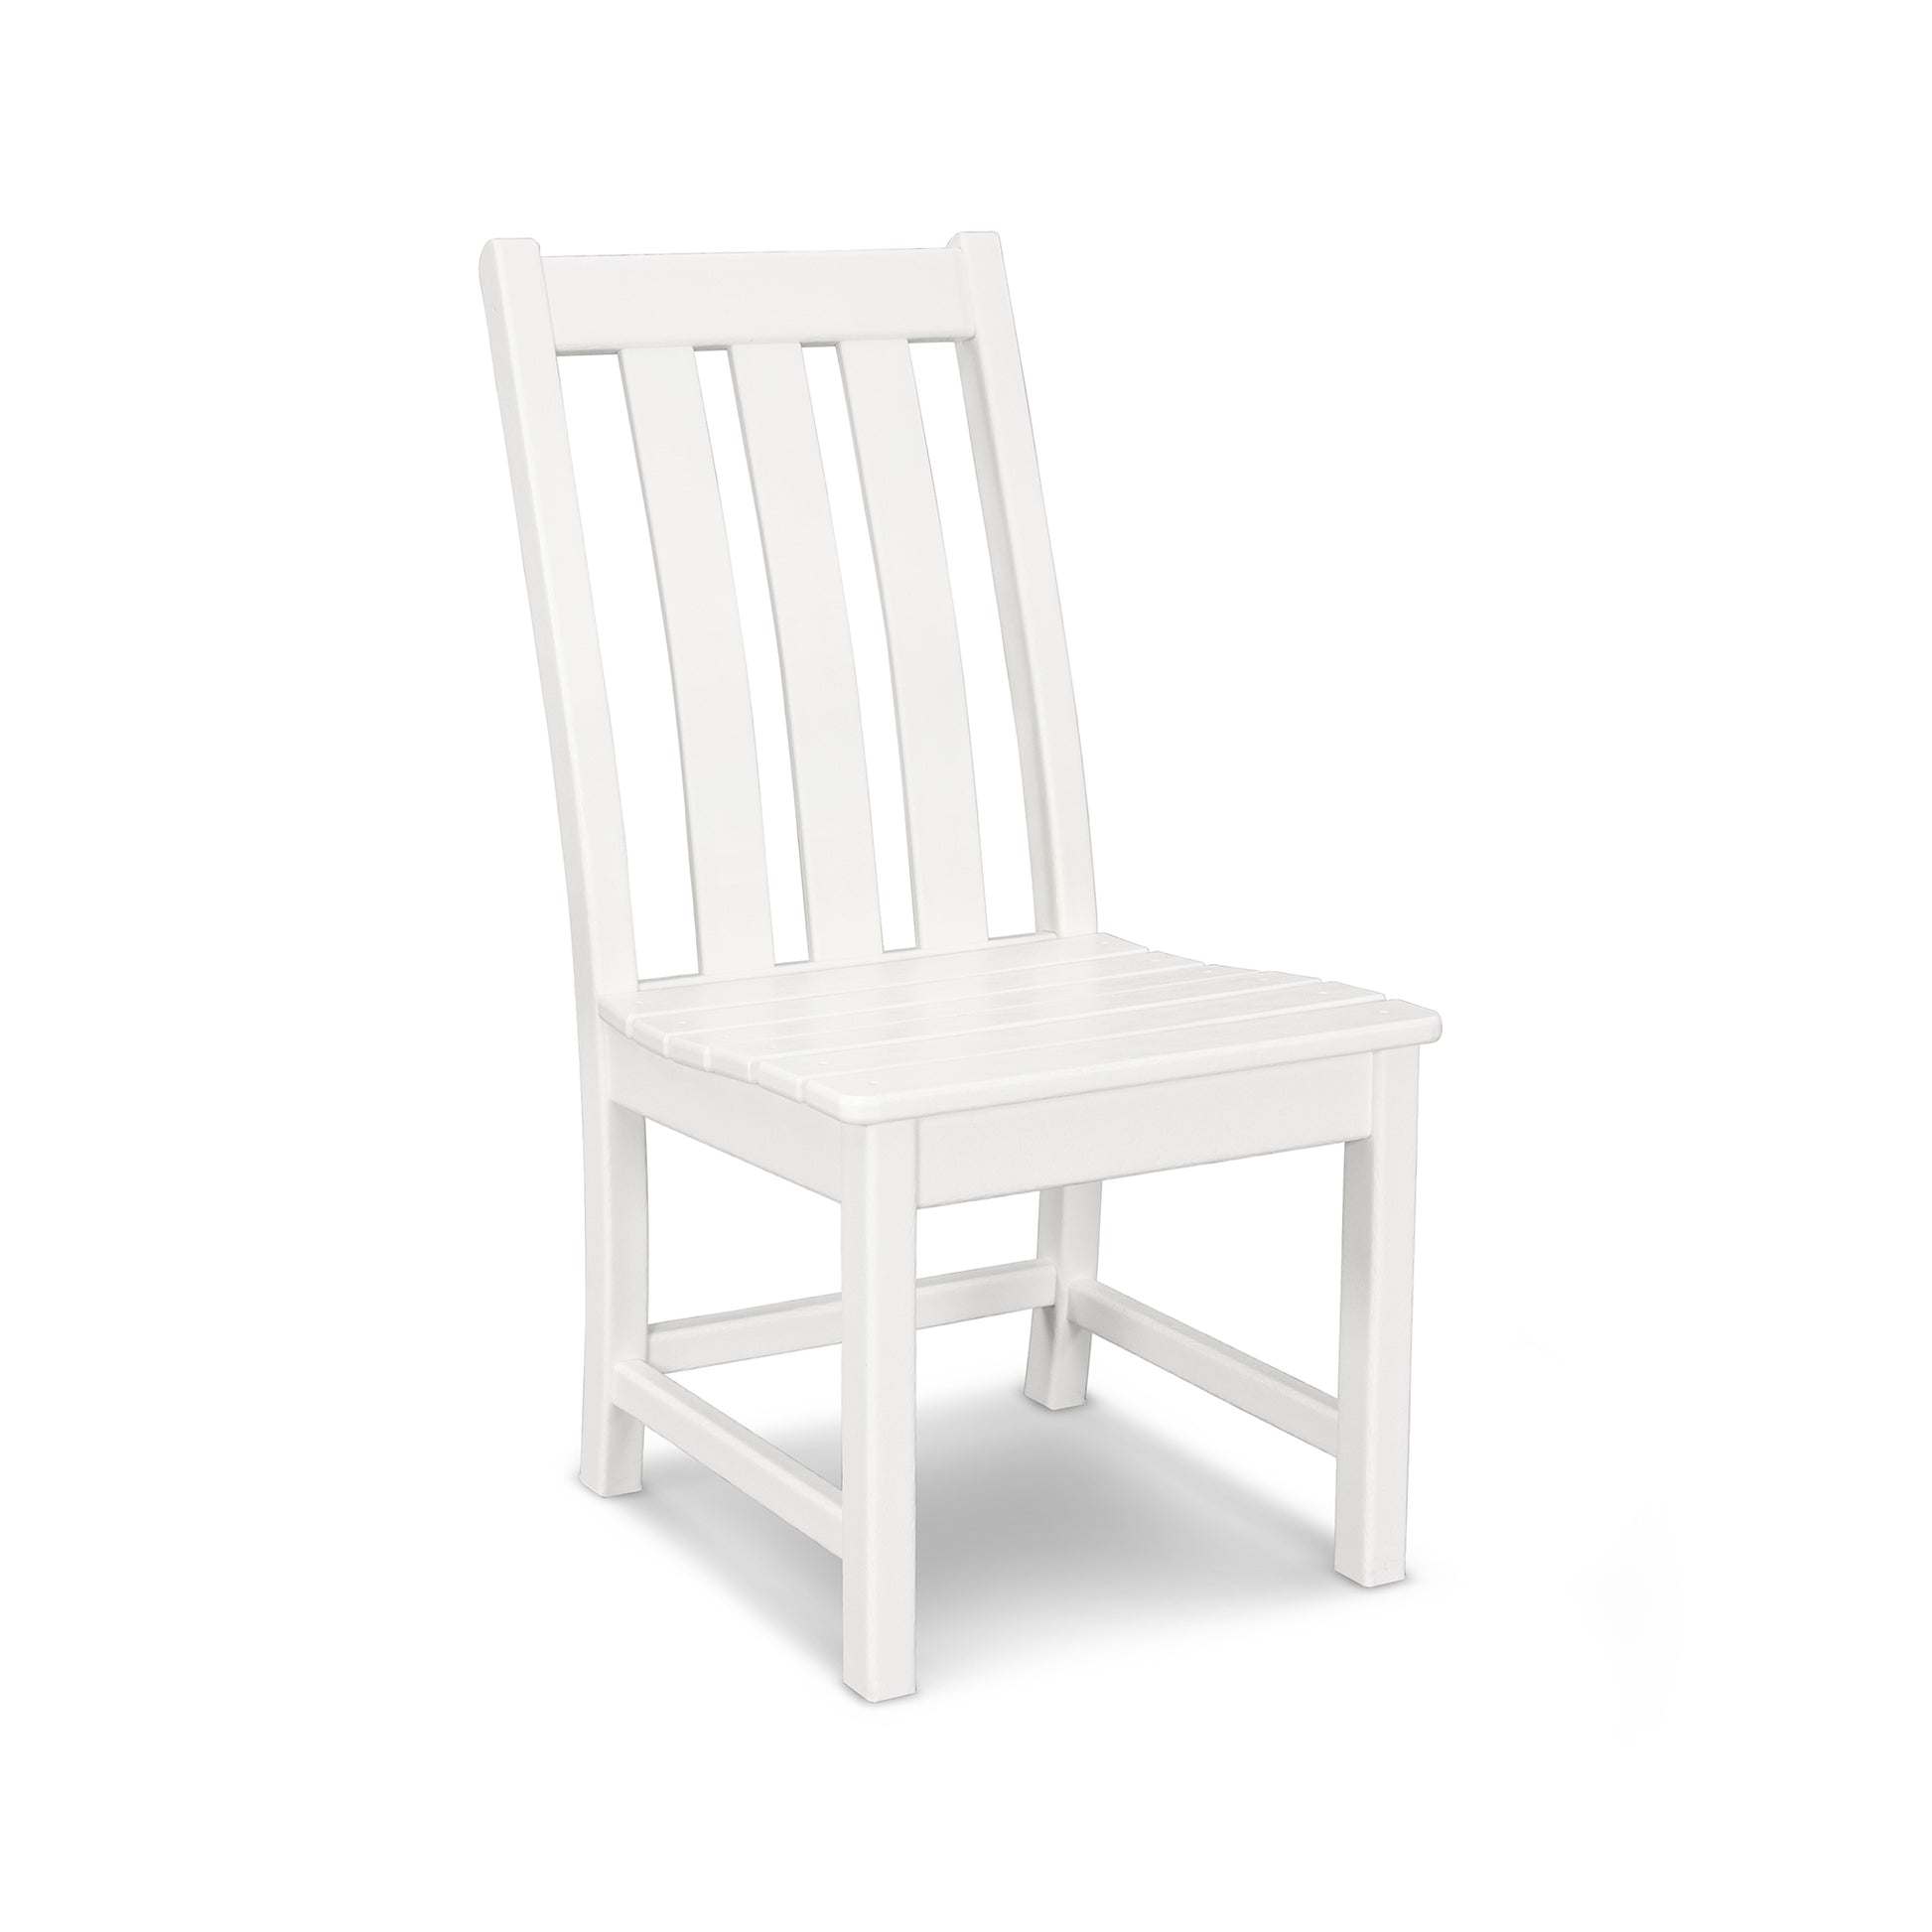 A single white POLYWOOD® Vineyard Dining Side Chair with a tall, vertical slat backrest and a flat seat, standing isolated on a plain white background.